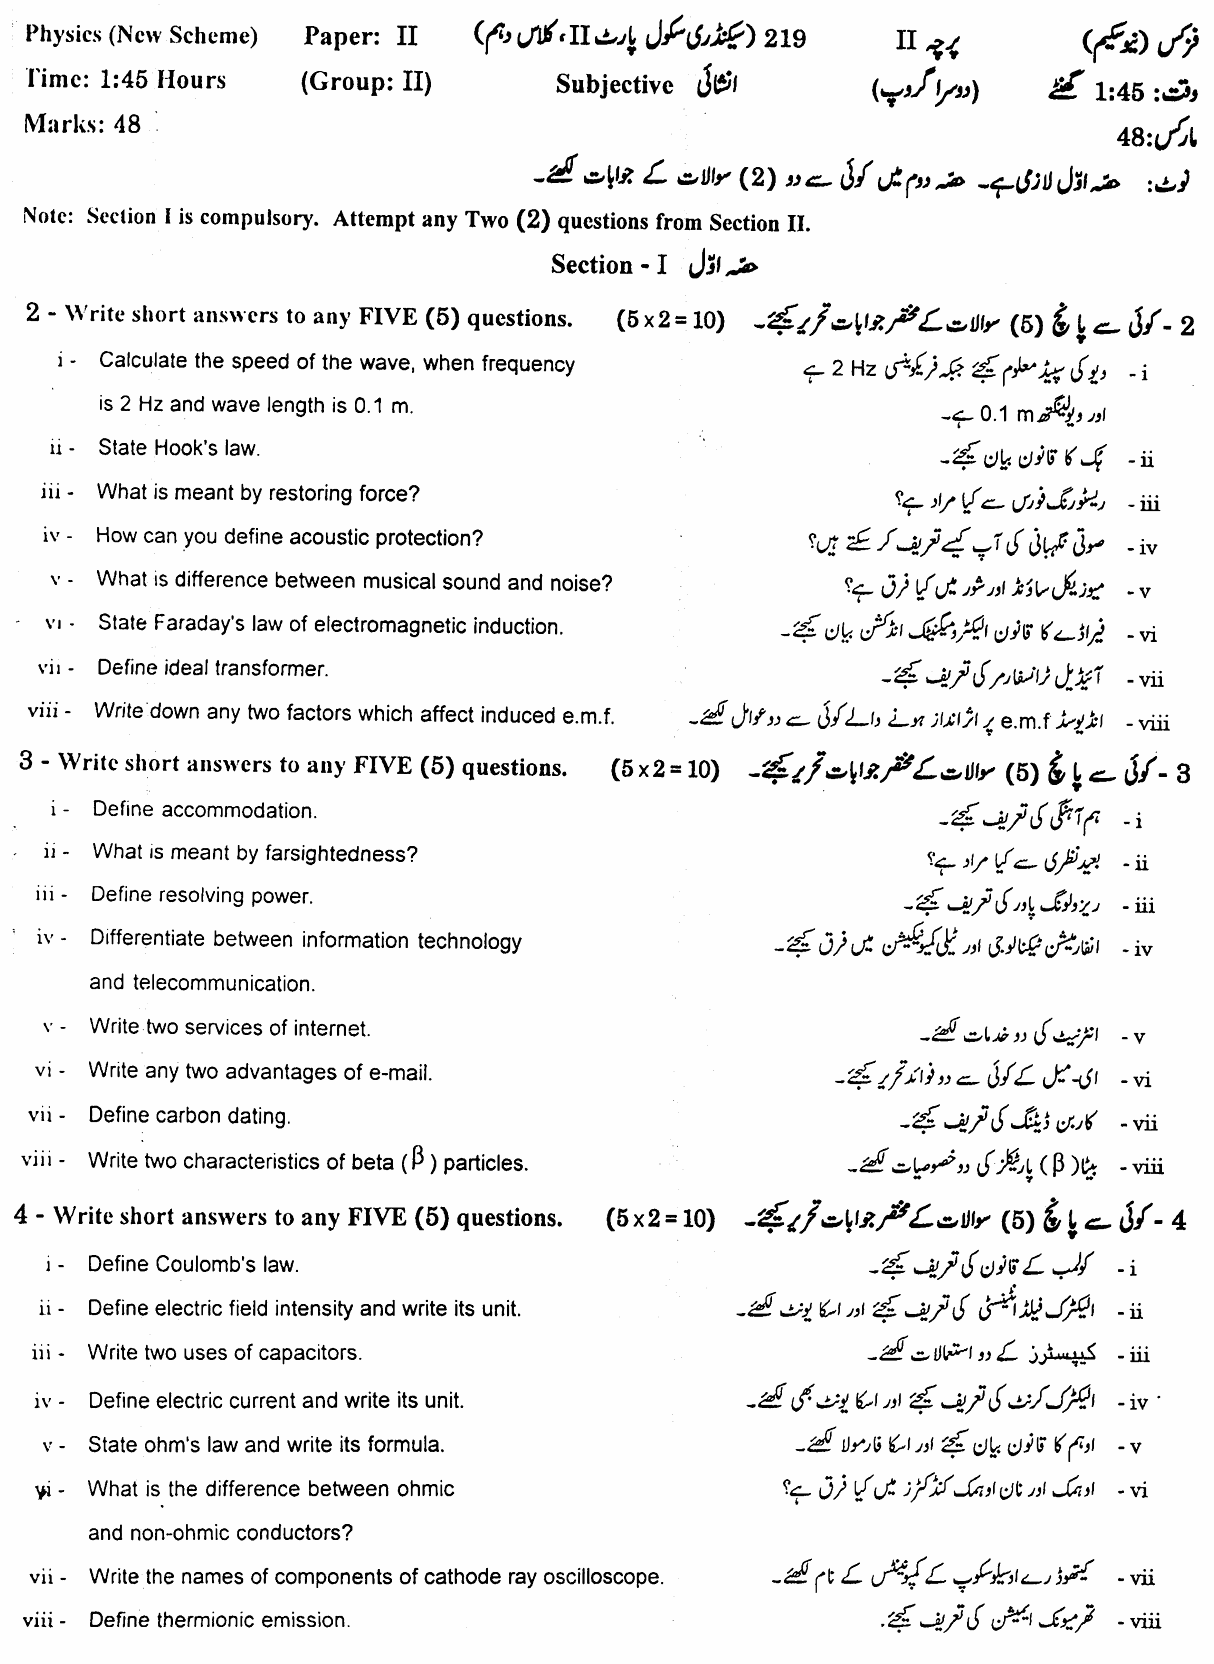 10th Class Physics Paper 2019 Gujranwala Board Subjective Group 2